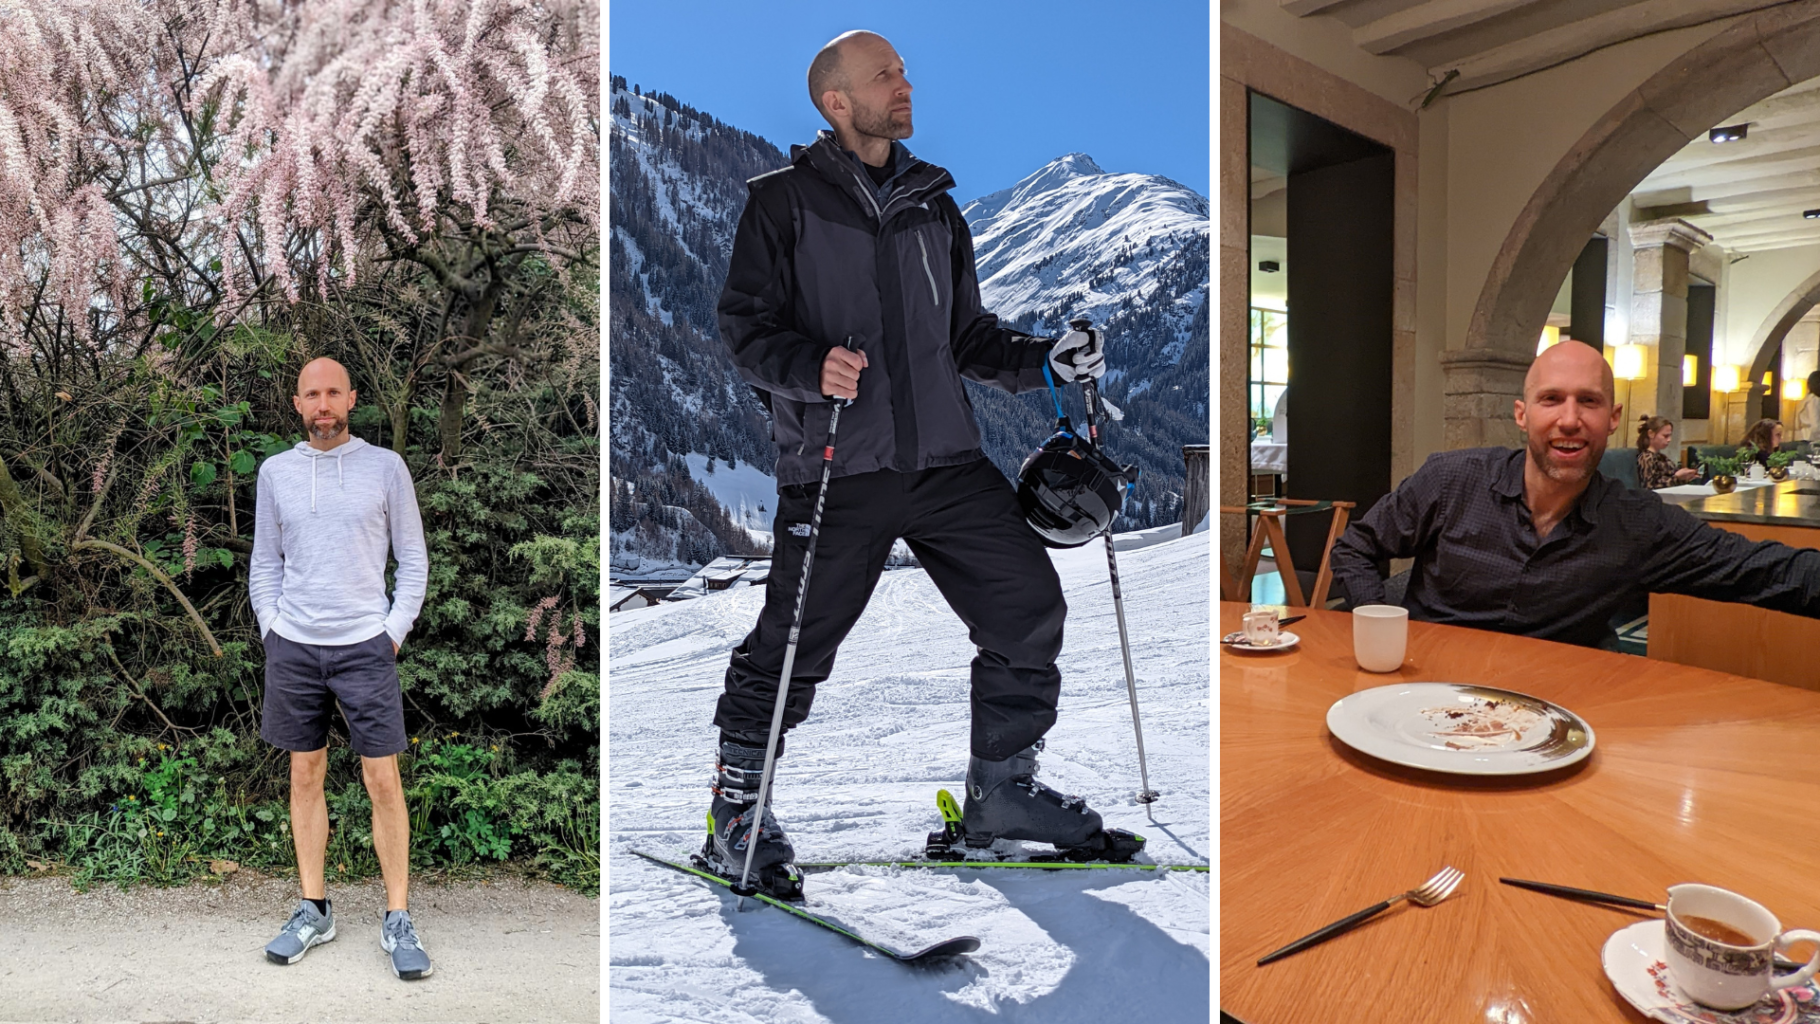 Composite images of a man posing for a photo in front of a hedge, on skis, and in a restaurant.